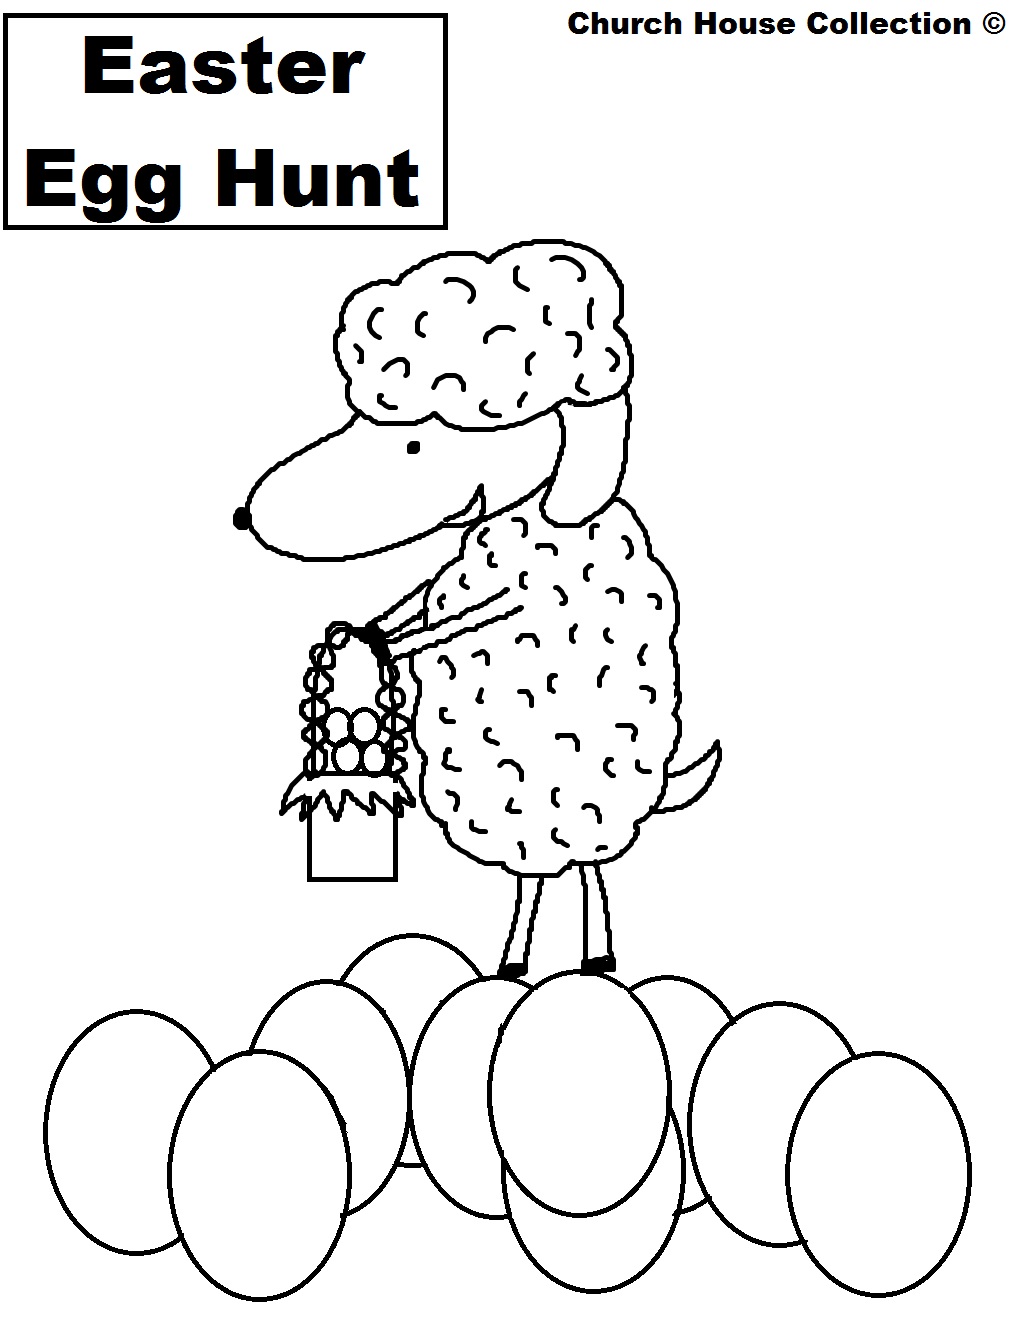 Church House Collection Blog: Easter Egg Hunt Coloring Page